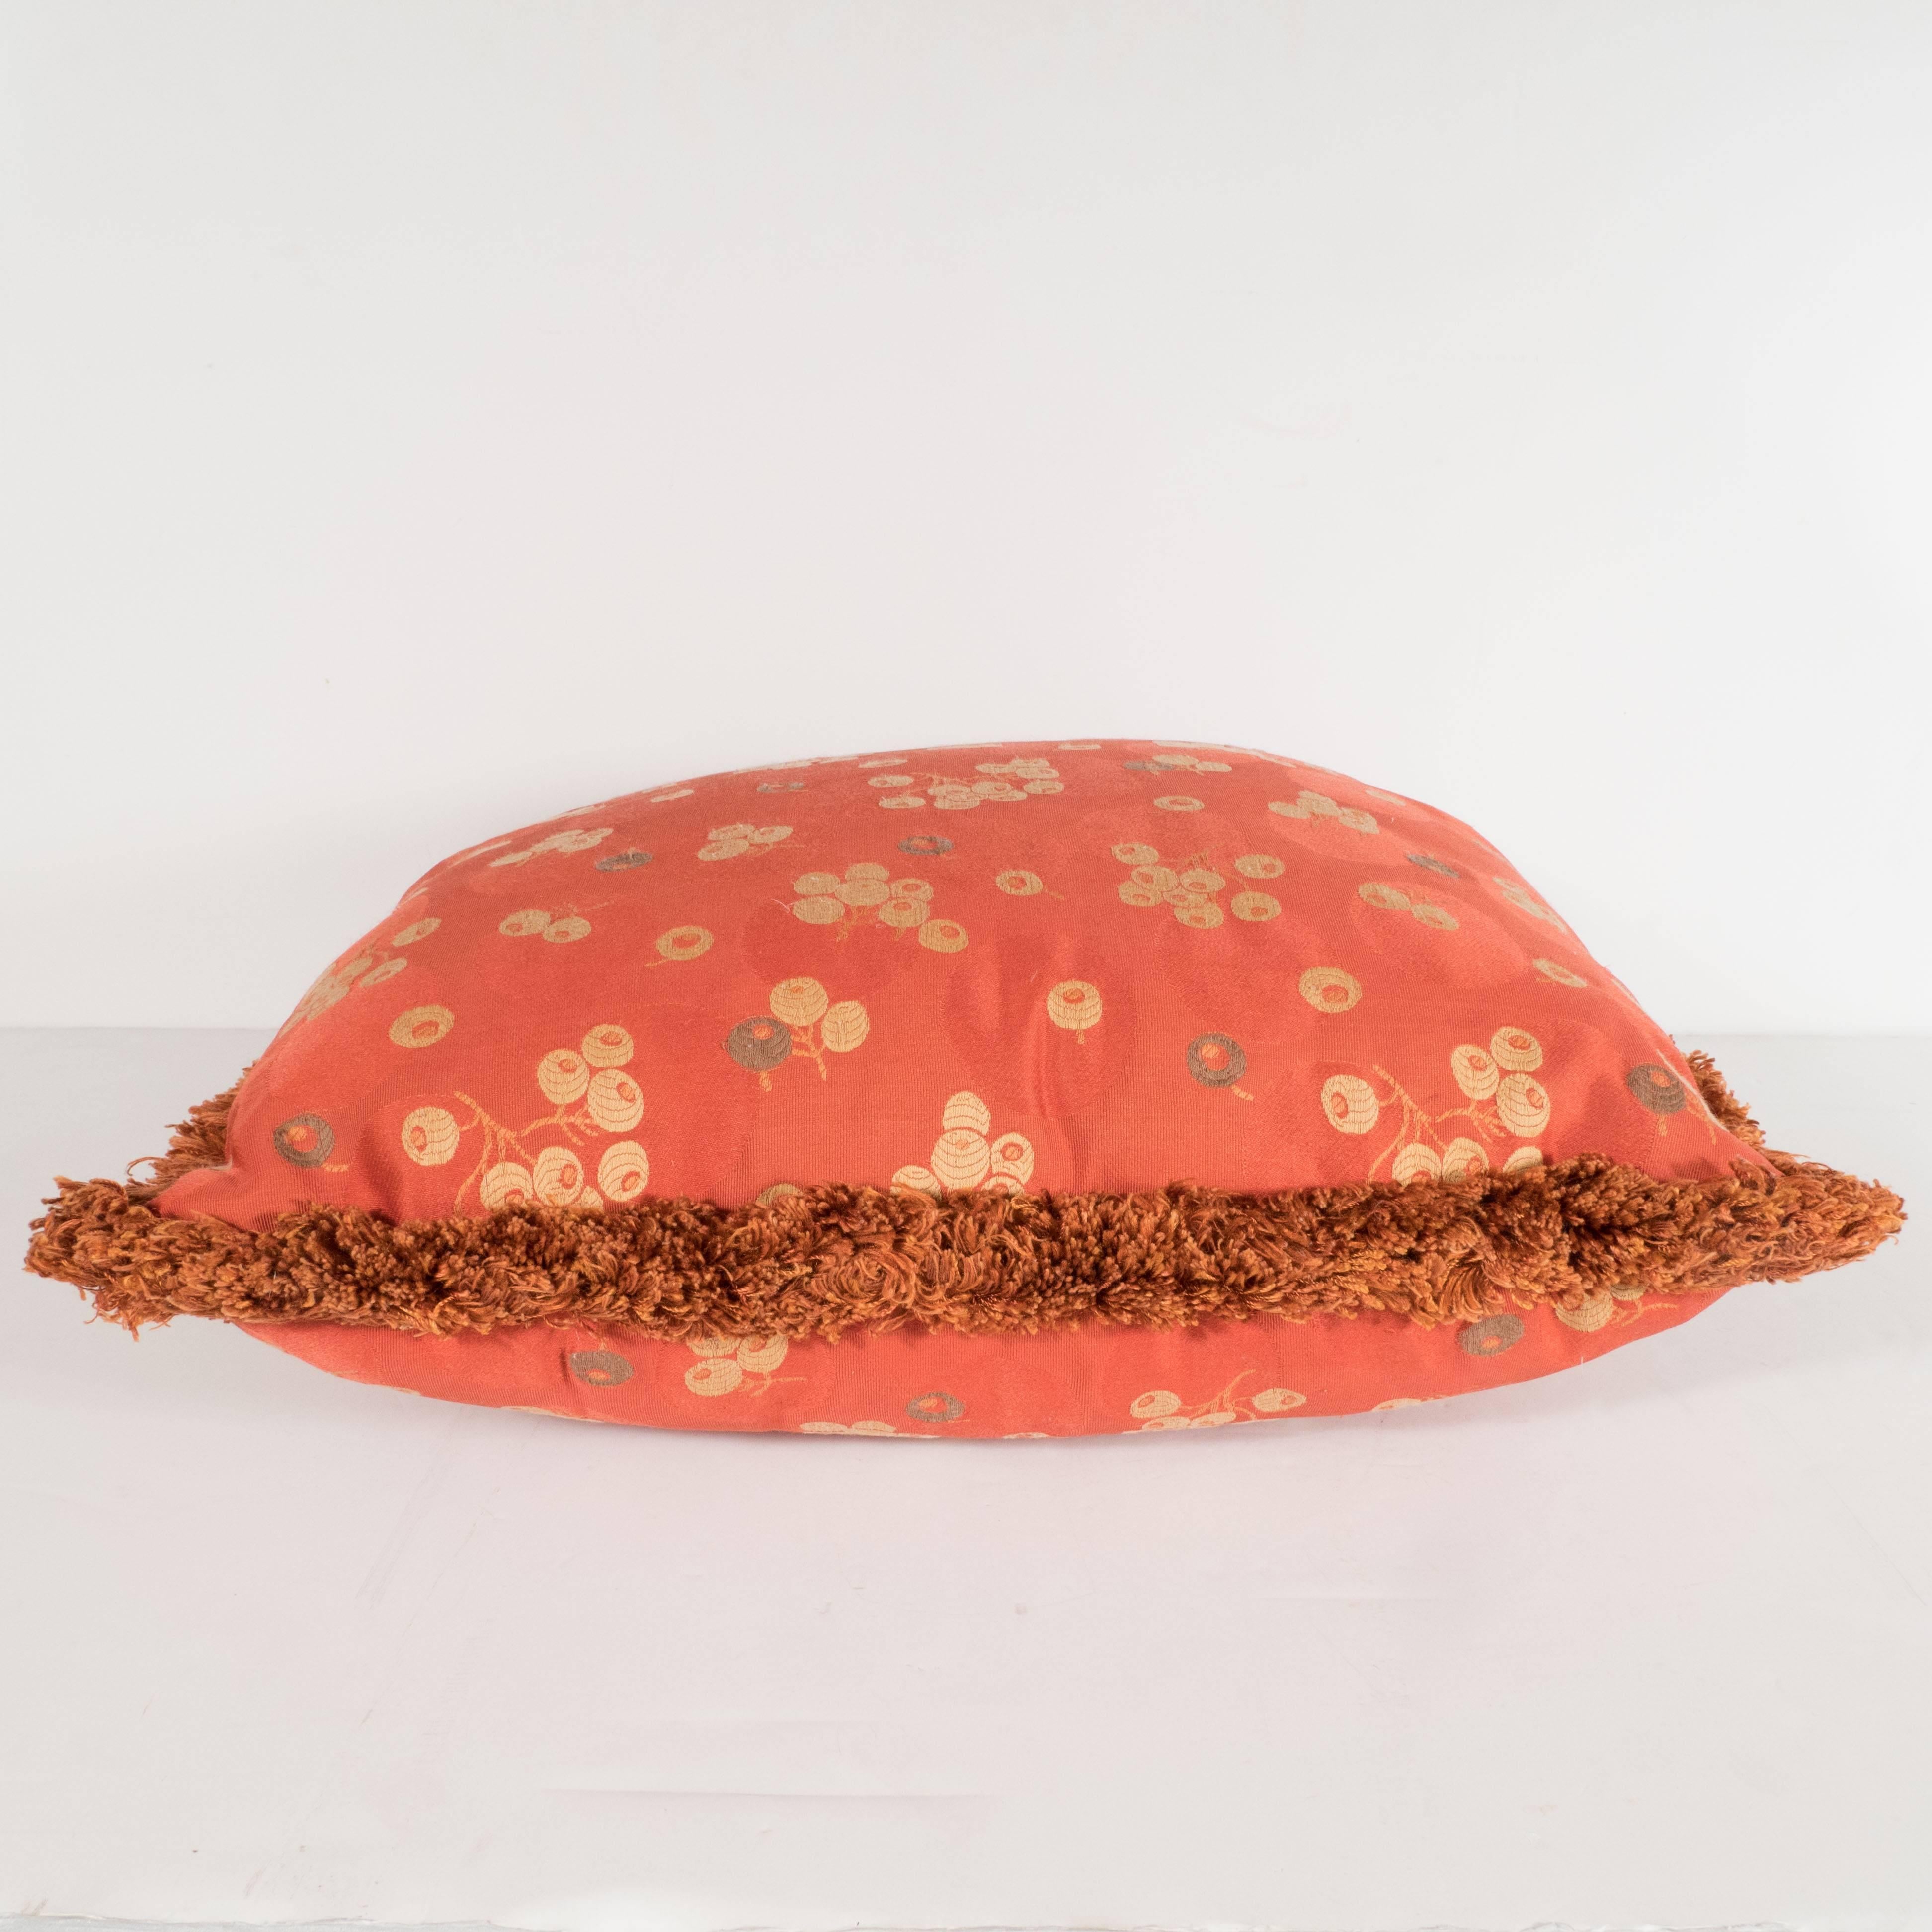 American Pair of Modernist Carnelian Red and Tan Japonisme Inspired Pillows